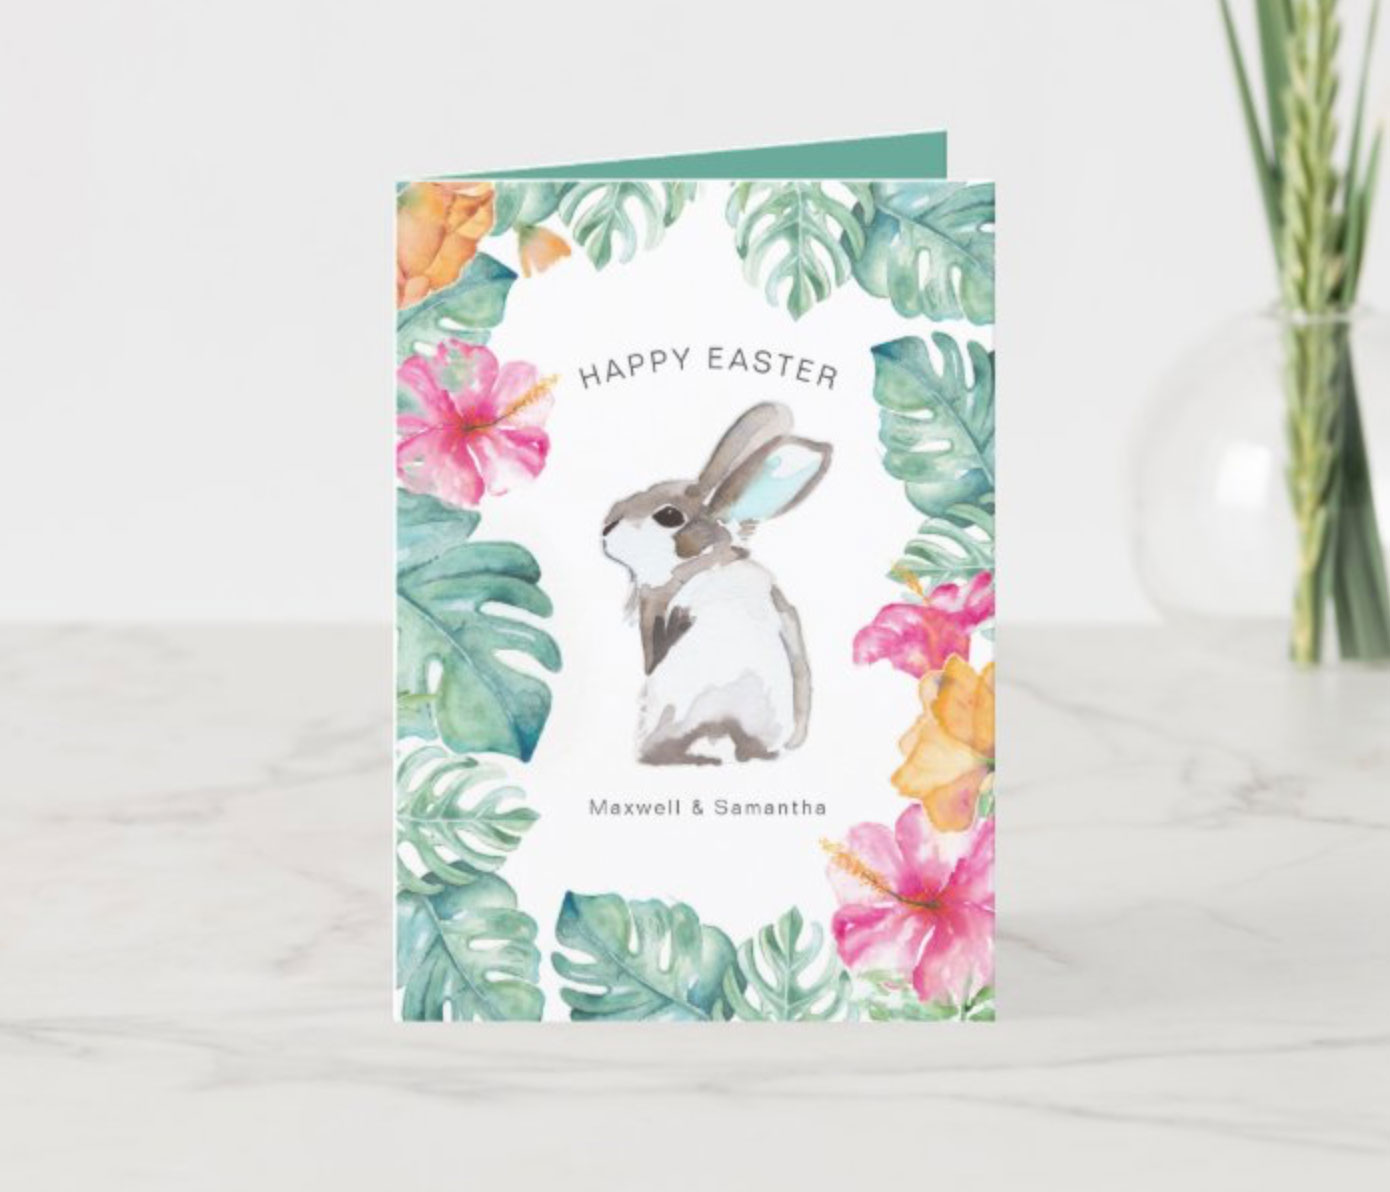 Tropical watercolor Easter cards designed by Victoria featuring a cute rabbit surrounded by monstera palm leaves and tropical pink and orange flowers.